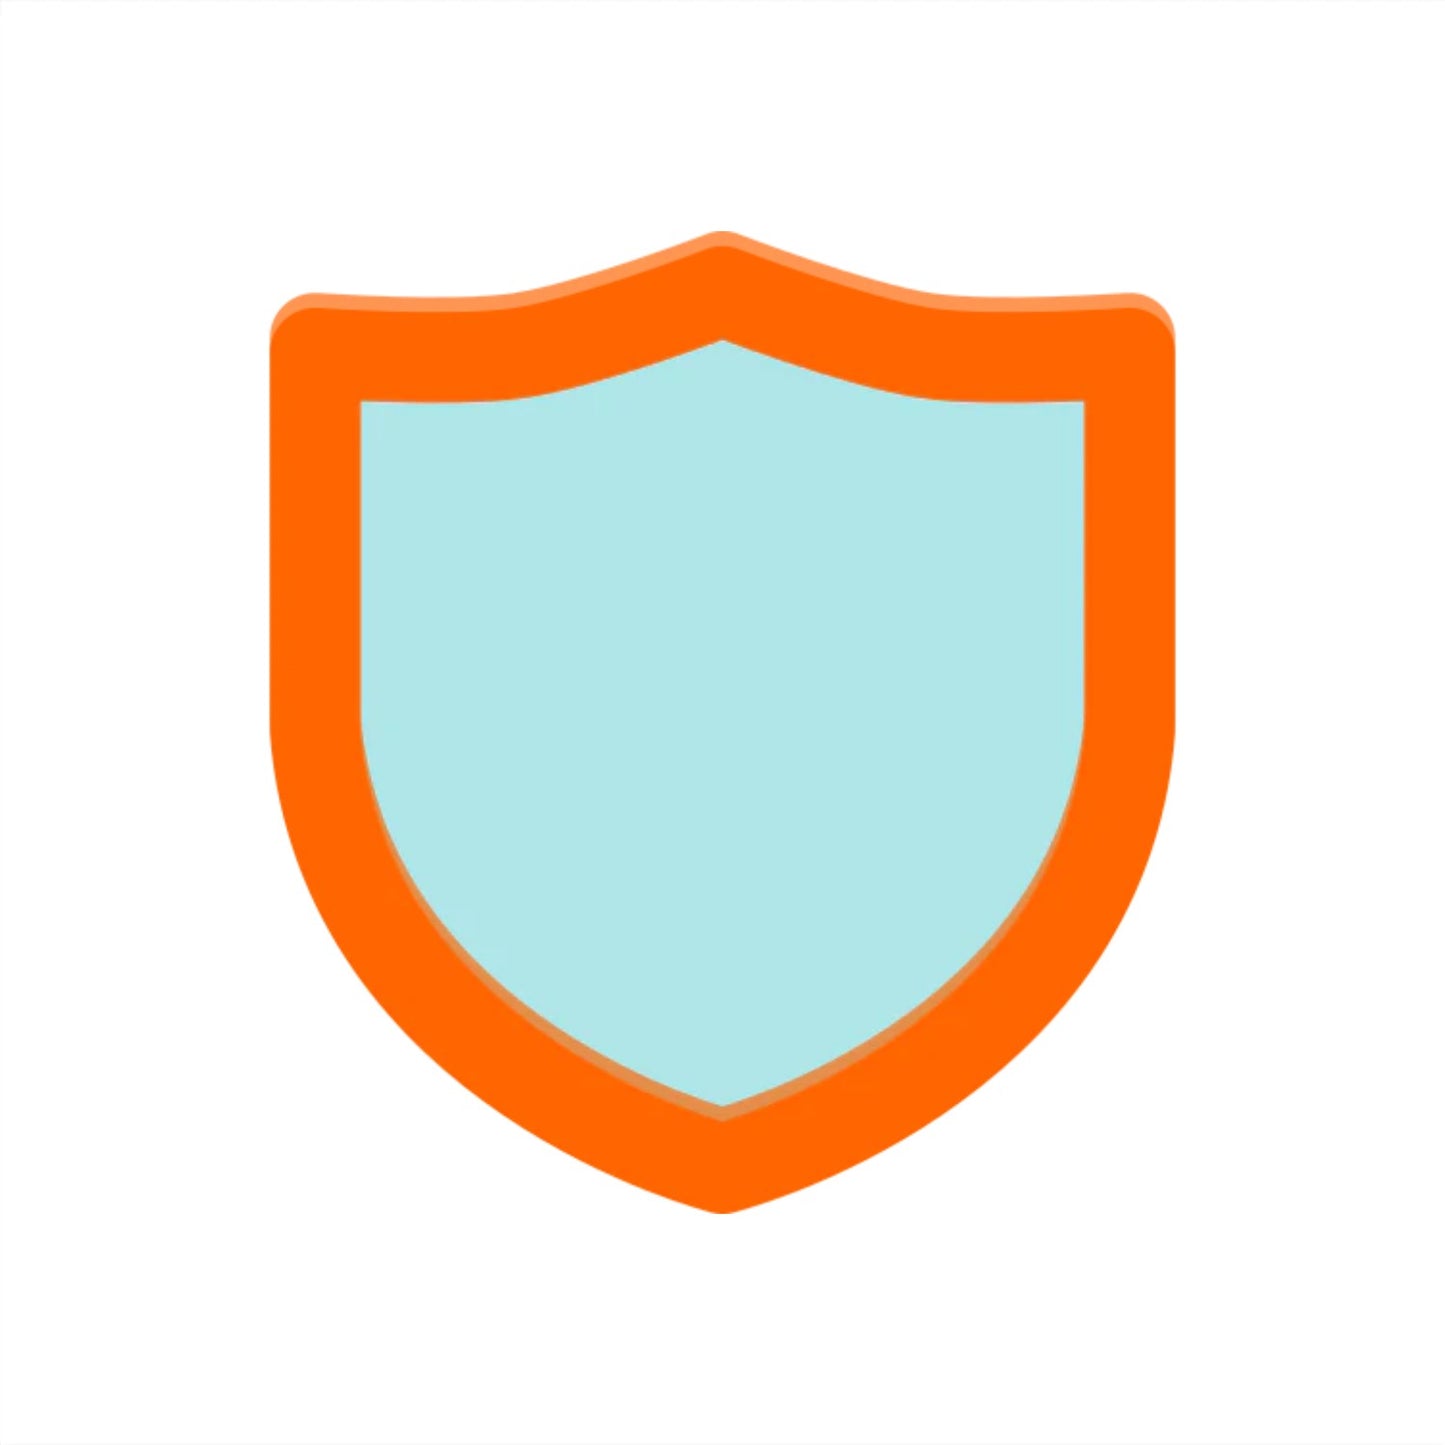 Illustration of a simple shield, with a broad orange border and a light blue center, depicted in the SafeTelecom Plus Store Upgrade graphic style on a white background.